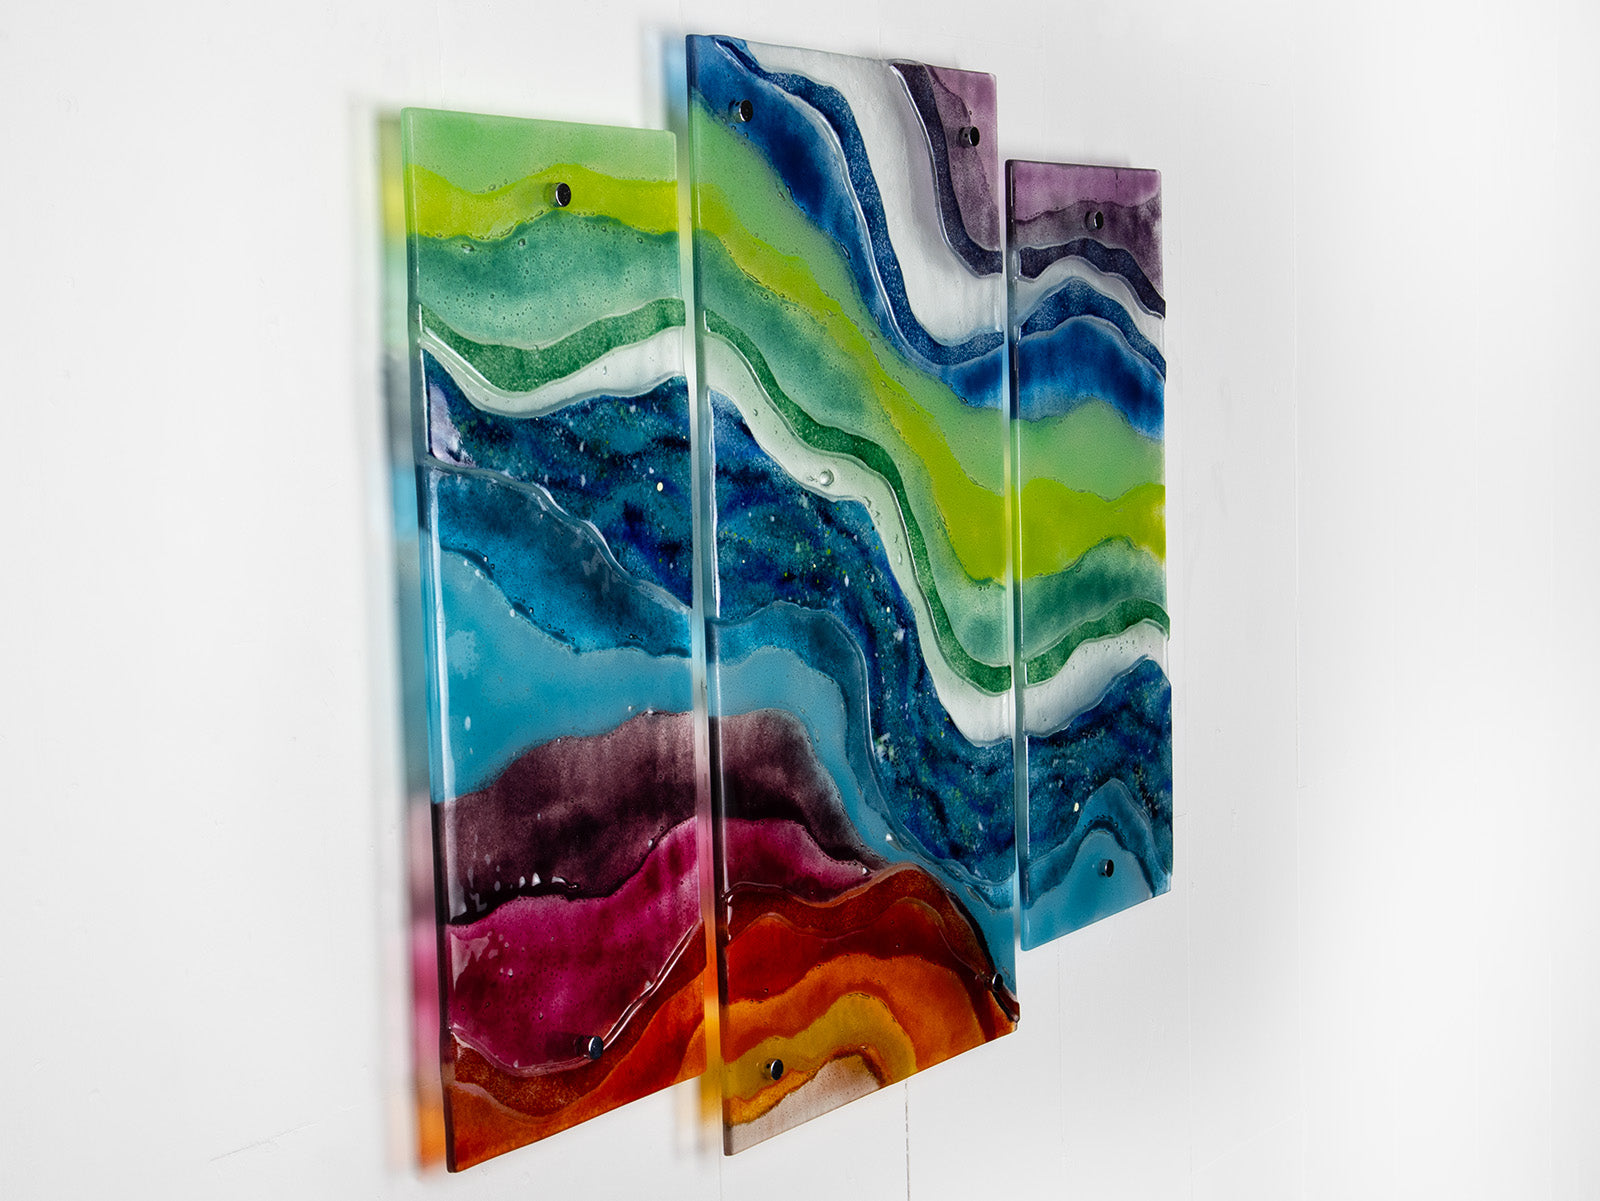 Artisan Rainbow Waves Staggered Triptych